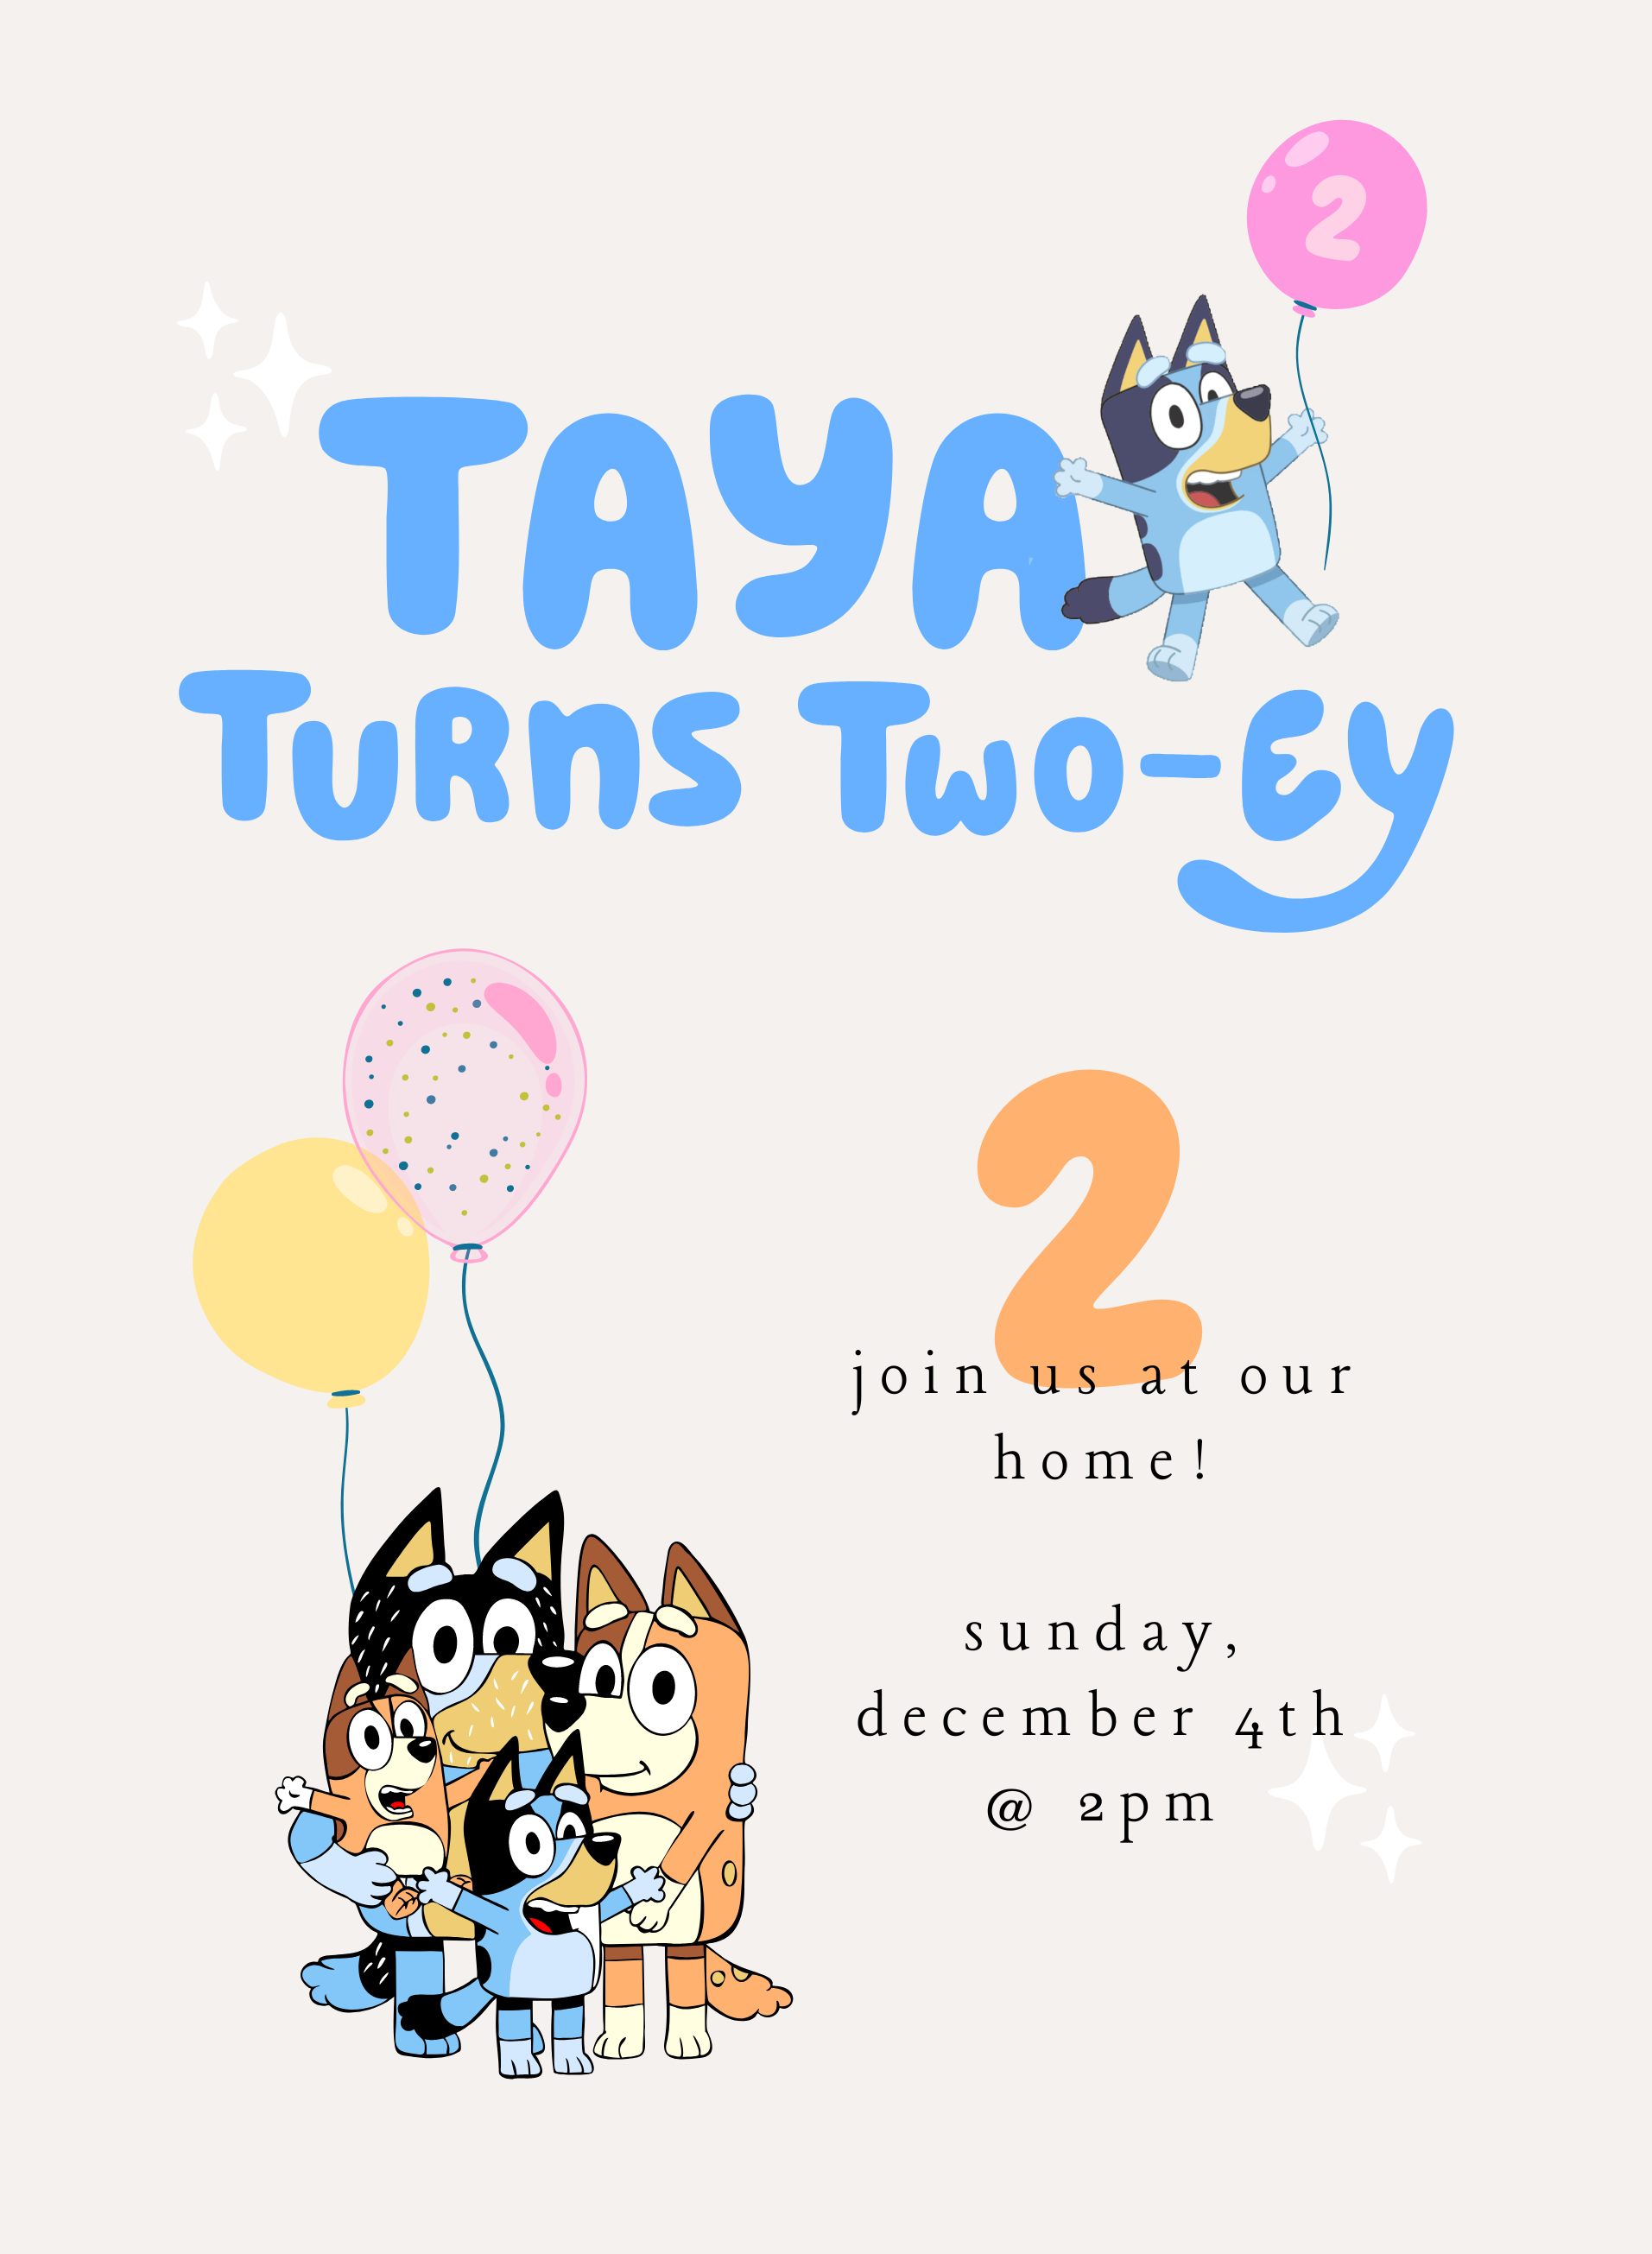 Taya Turns Two-ey (Bluey Toddler Birthday Party) - party invite - bresheppard.com.png